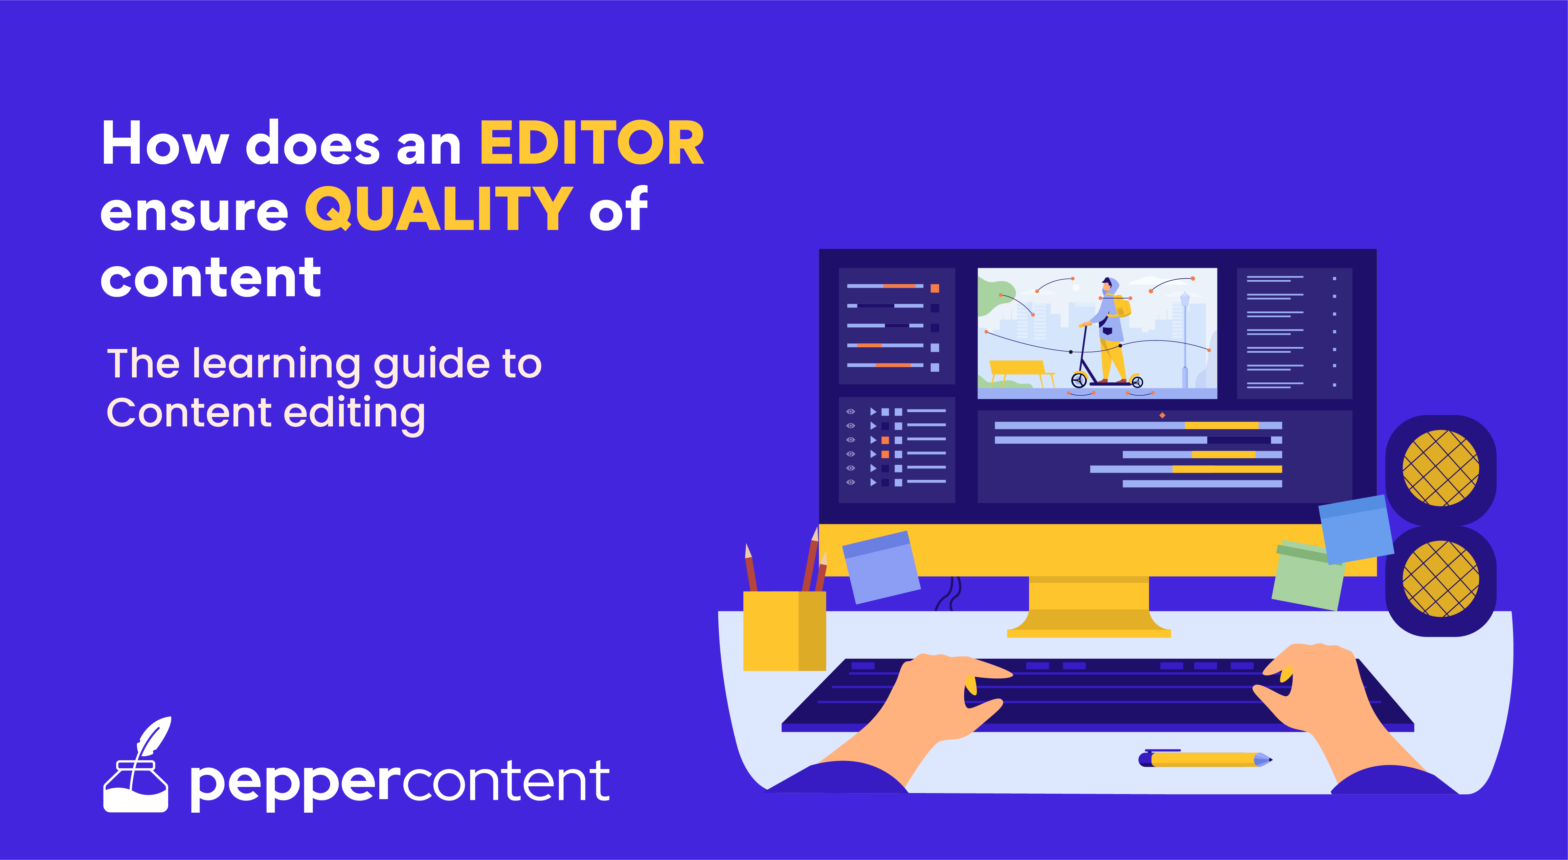 How Does an Editor Ensure Quality of Content?